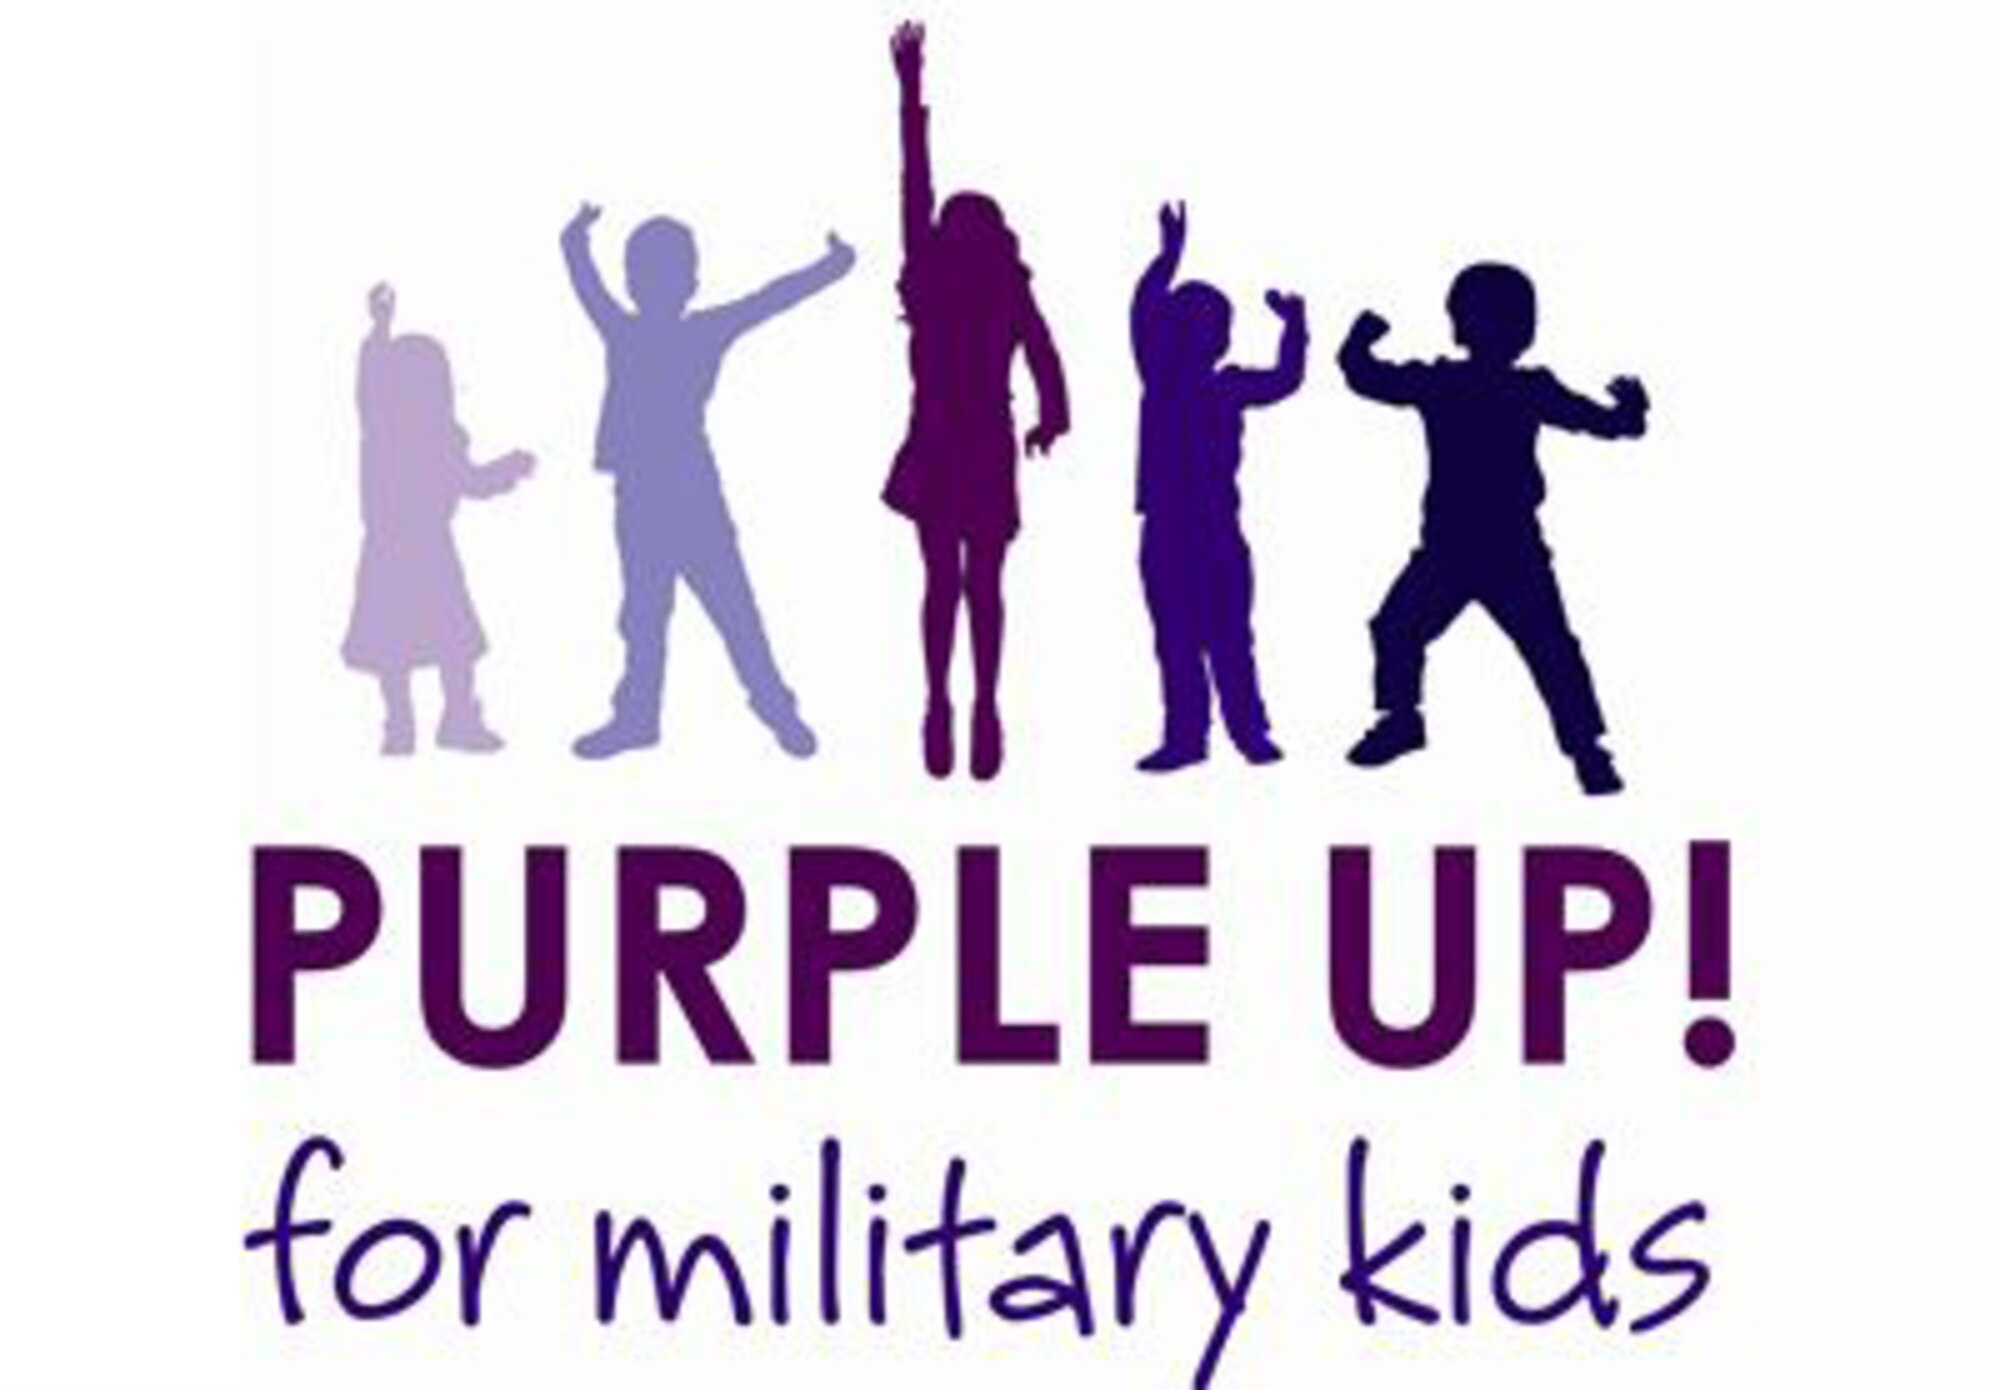 The Purple Up! campaign honors military children.